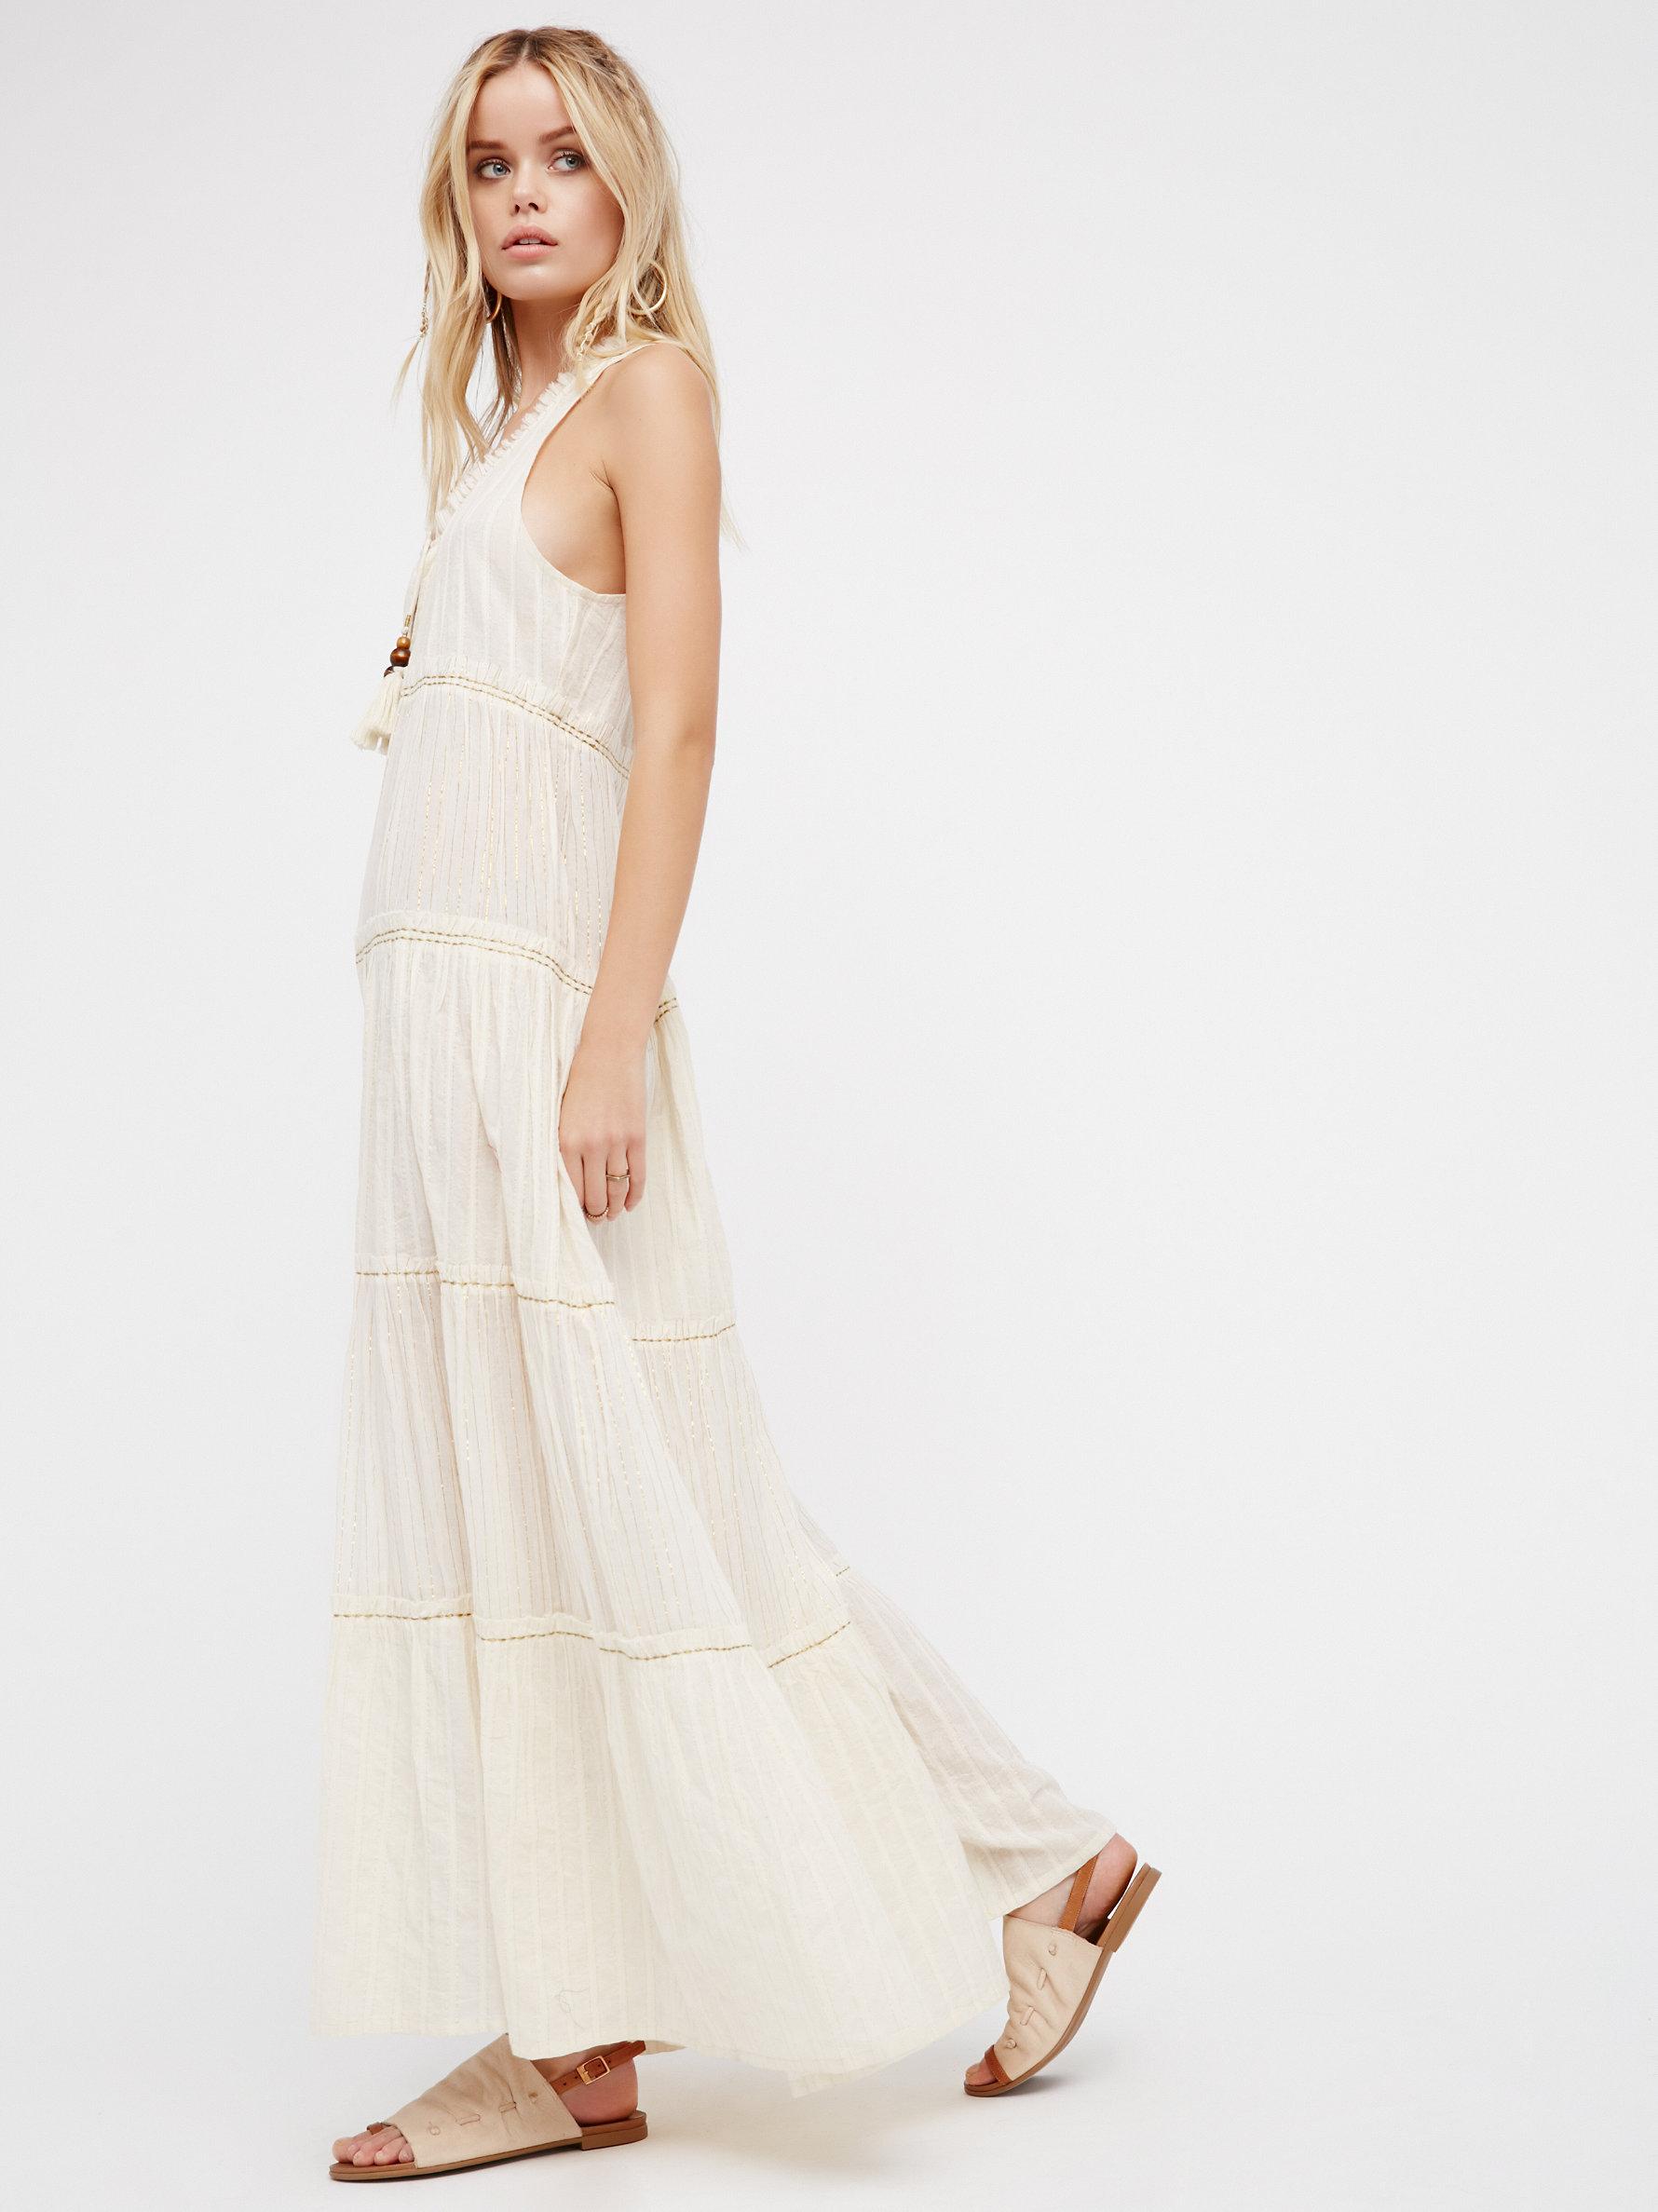 Lyst - Free People Beach Bum Jumpsuit in White